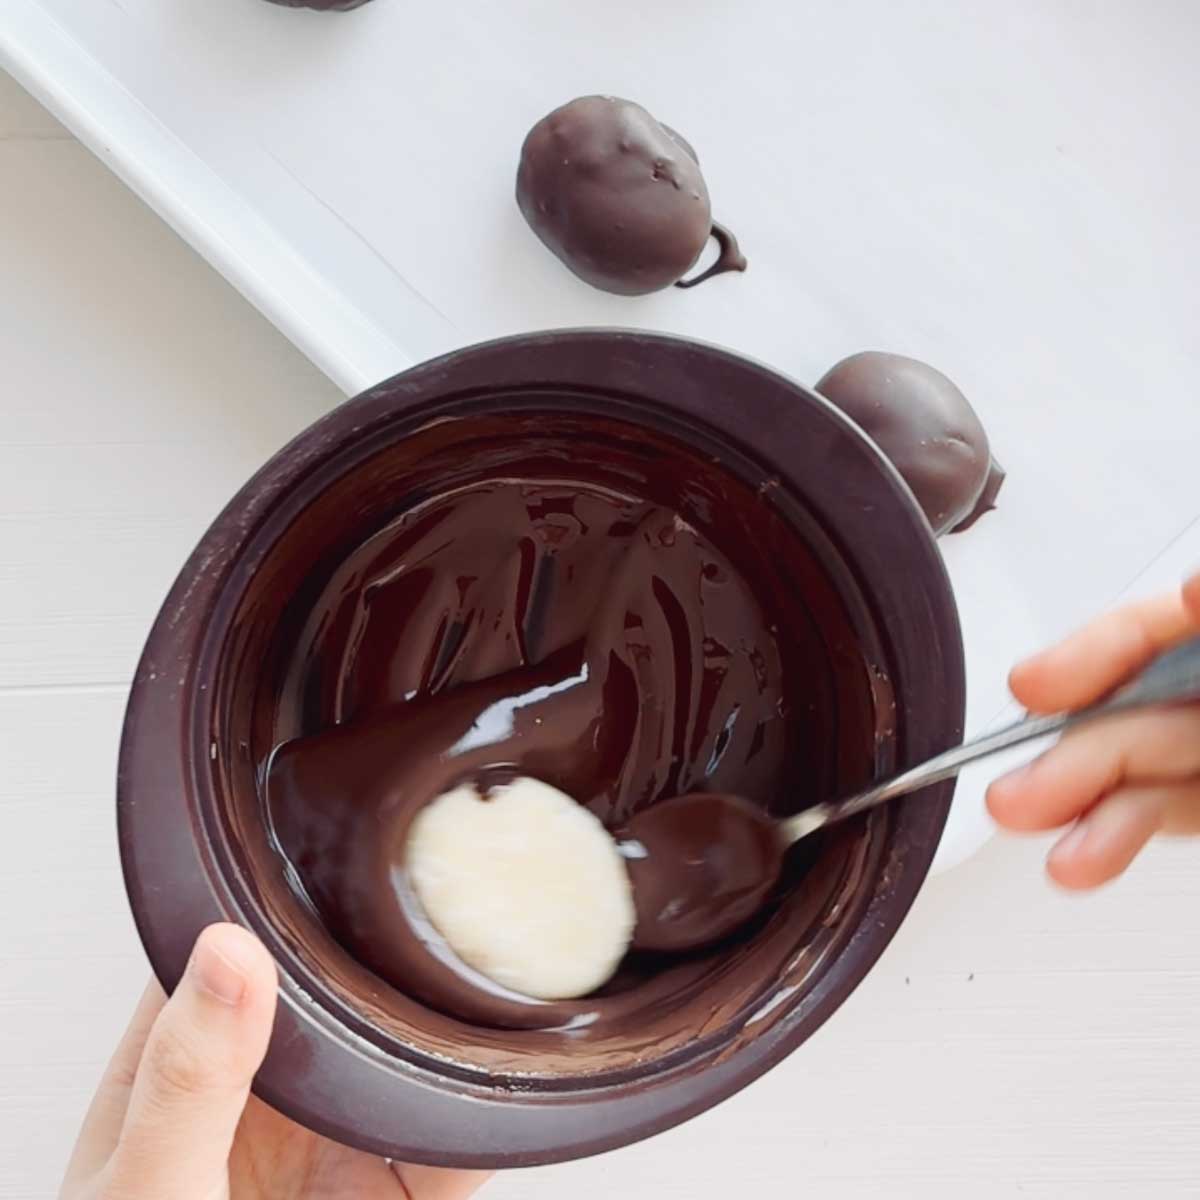 Chocolate Coconut Easter Eggs Made with Collagen Protein Powder - Ricotta Almond Easter Eggs